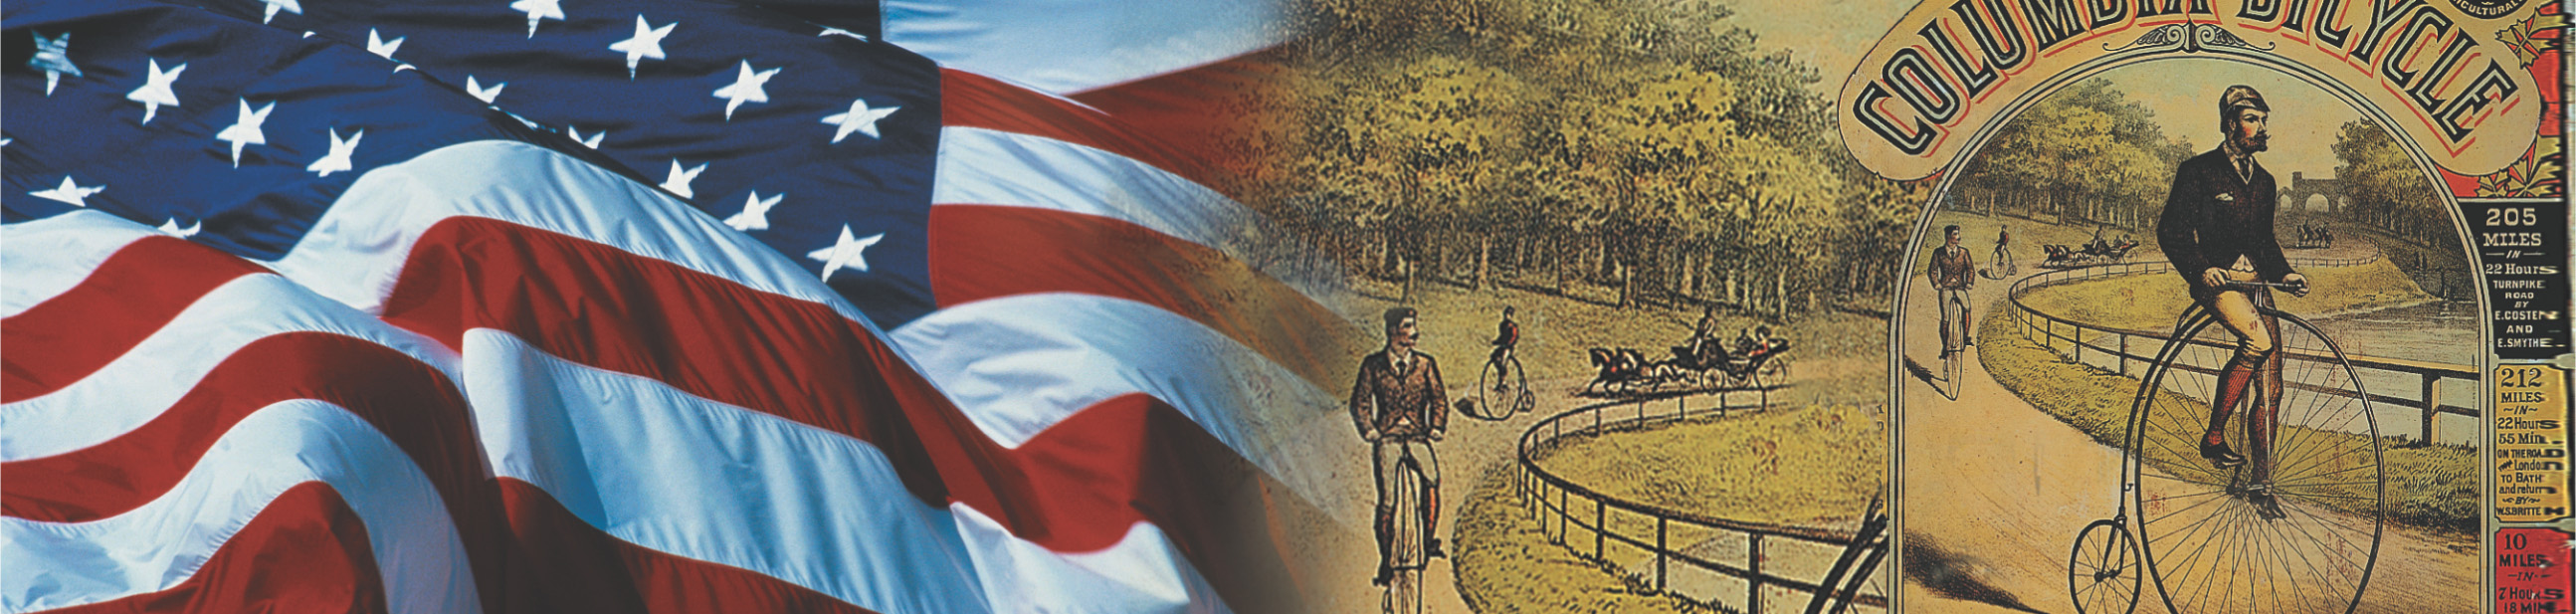 Banner: an American flag and a painting of men racing high-wheeled Penny Farthing bicycles.